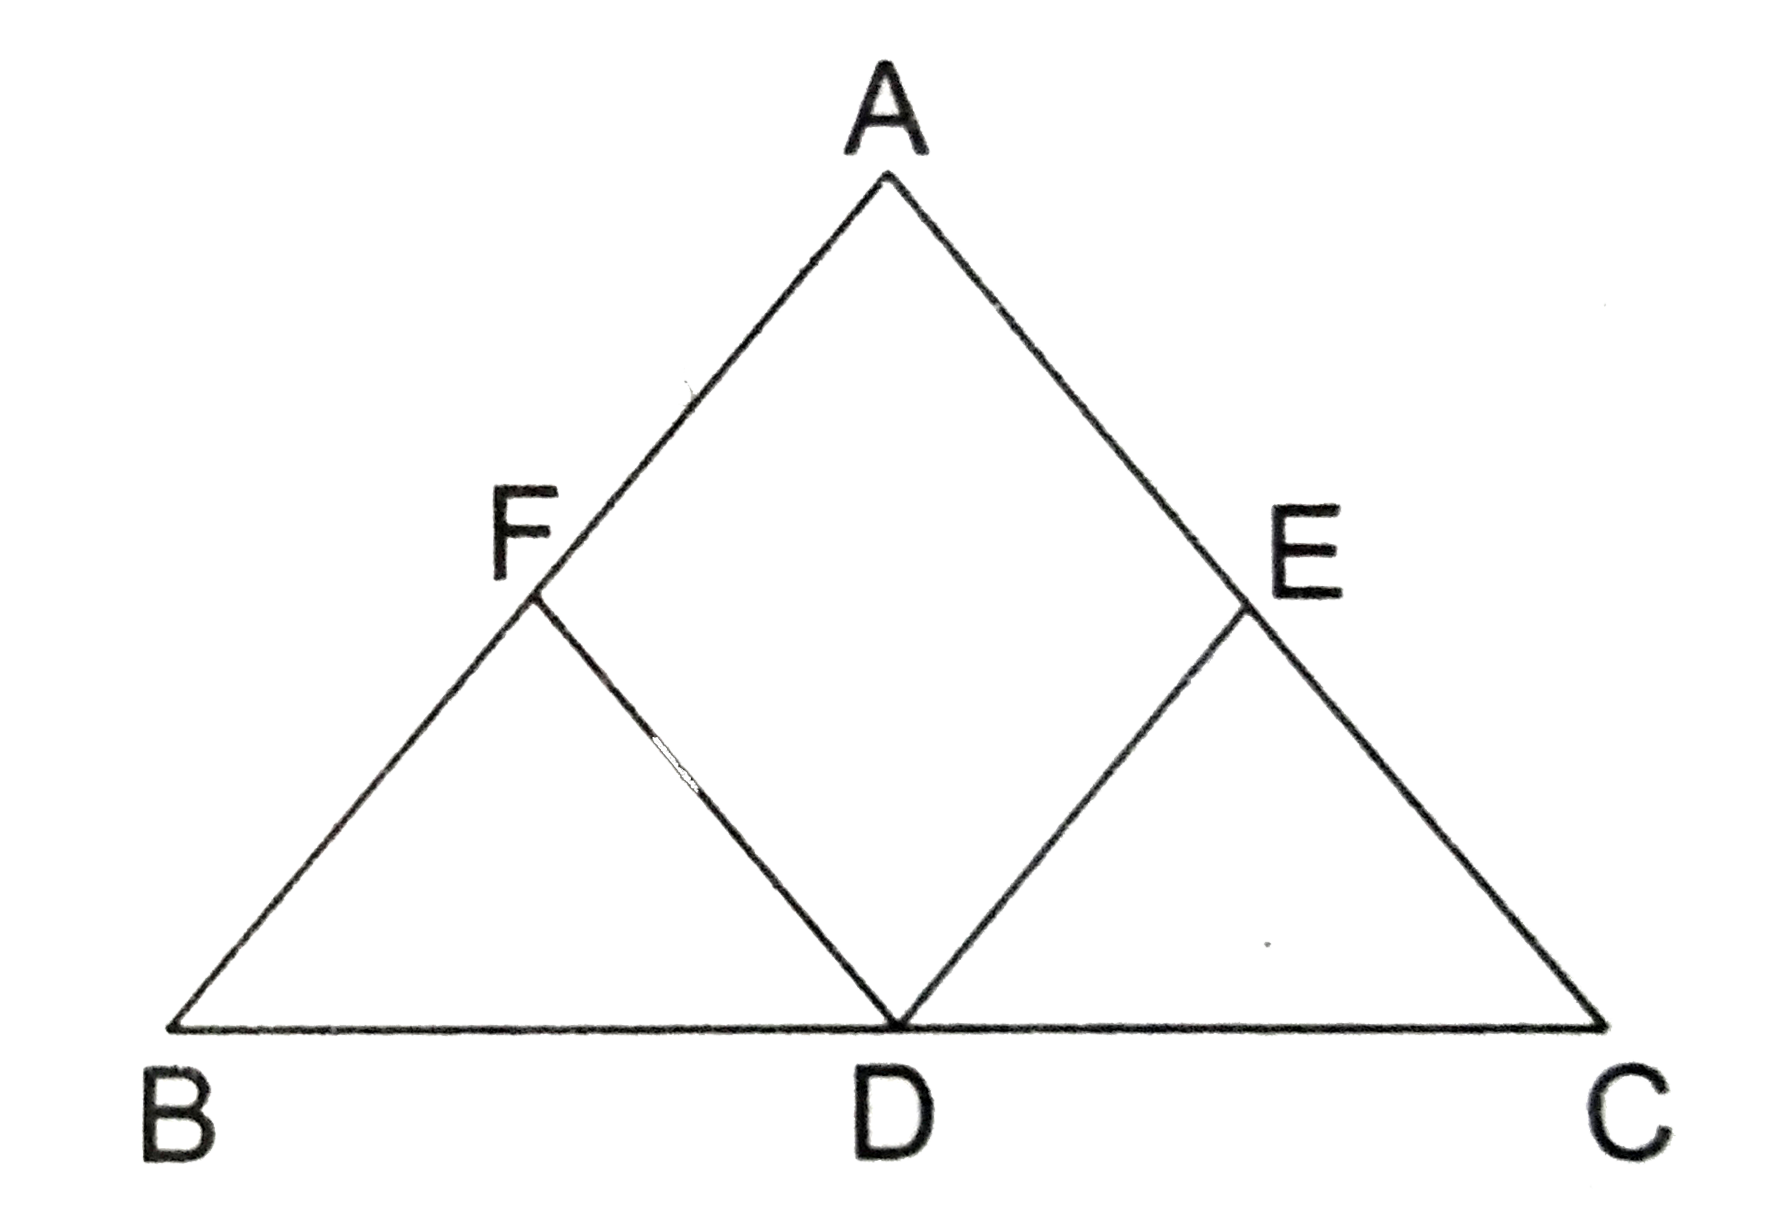 The midpoints of the sides of a triangle along with any of the vertices as the fourth point makes a parallelogram of area equal to